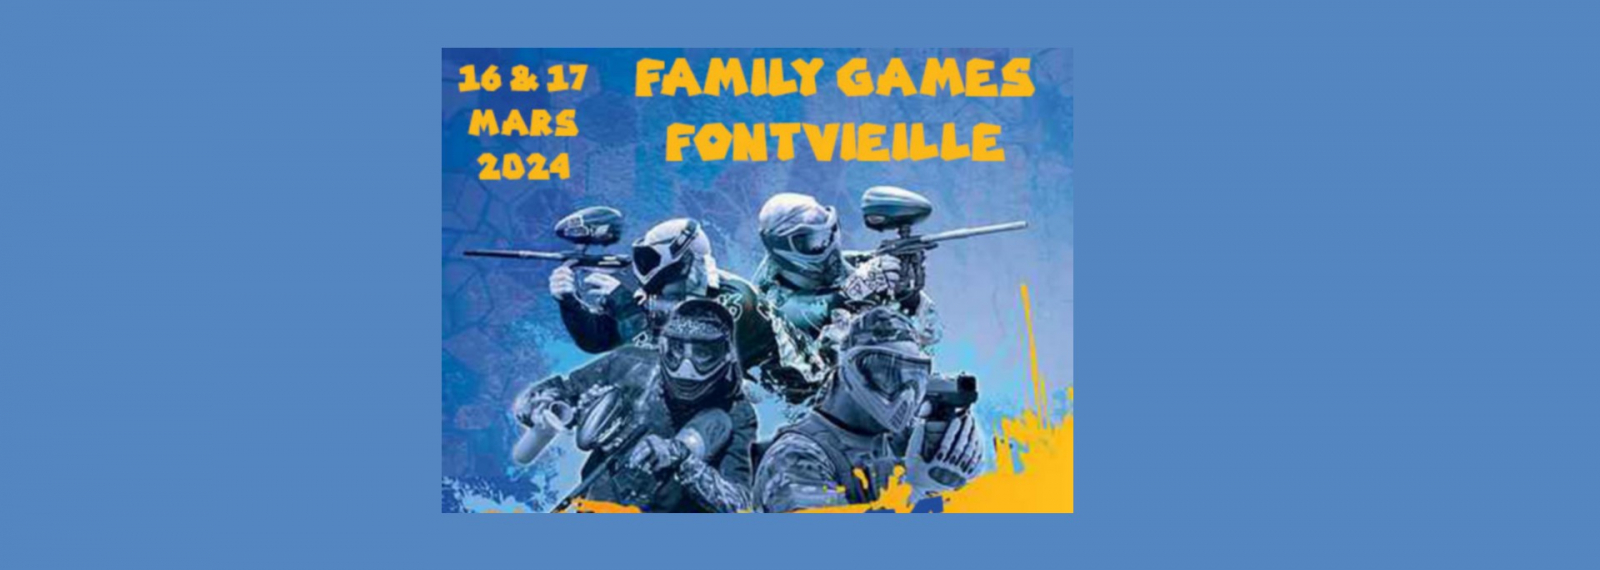 Family Games - PaintBall - Big Games Traquée